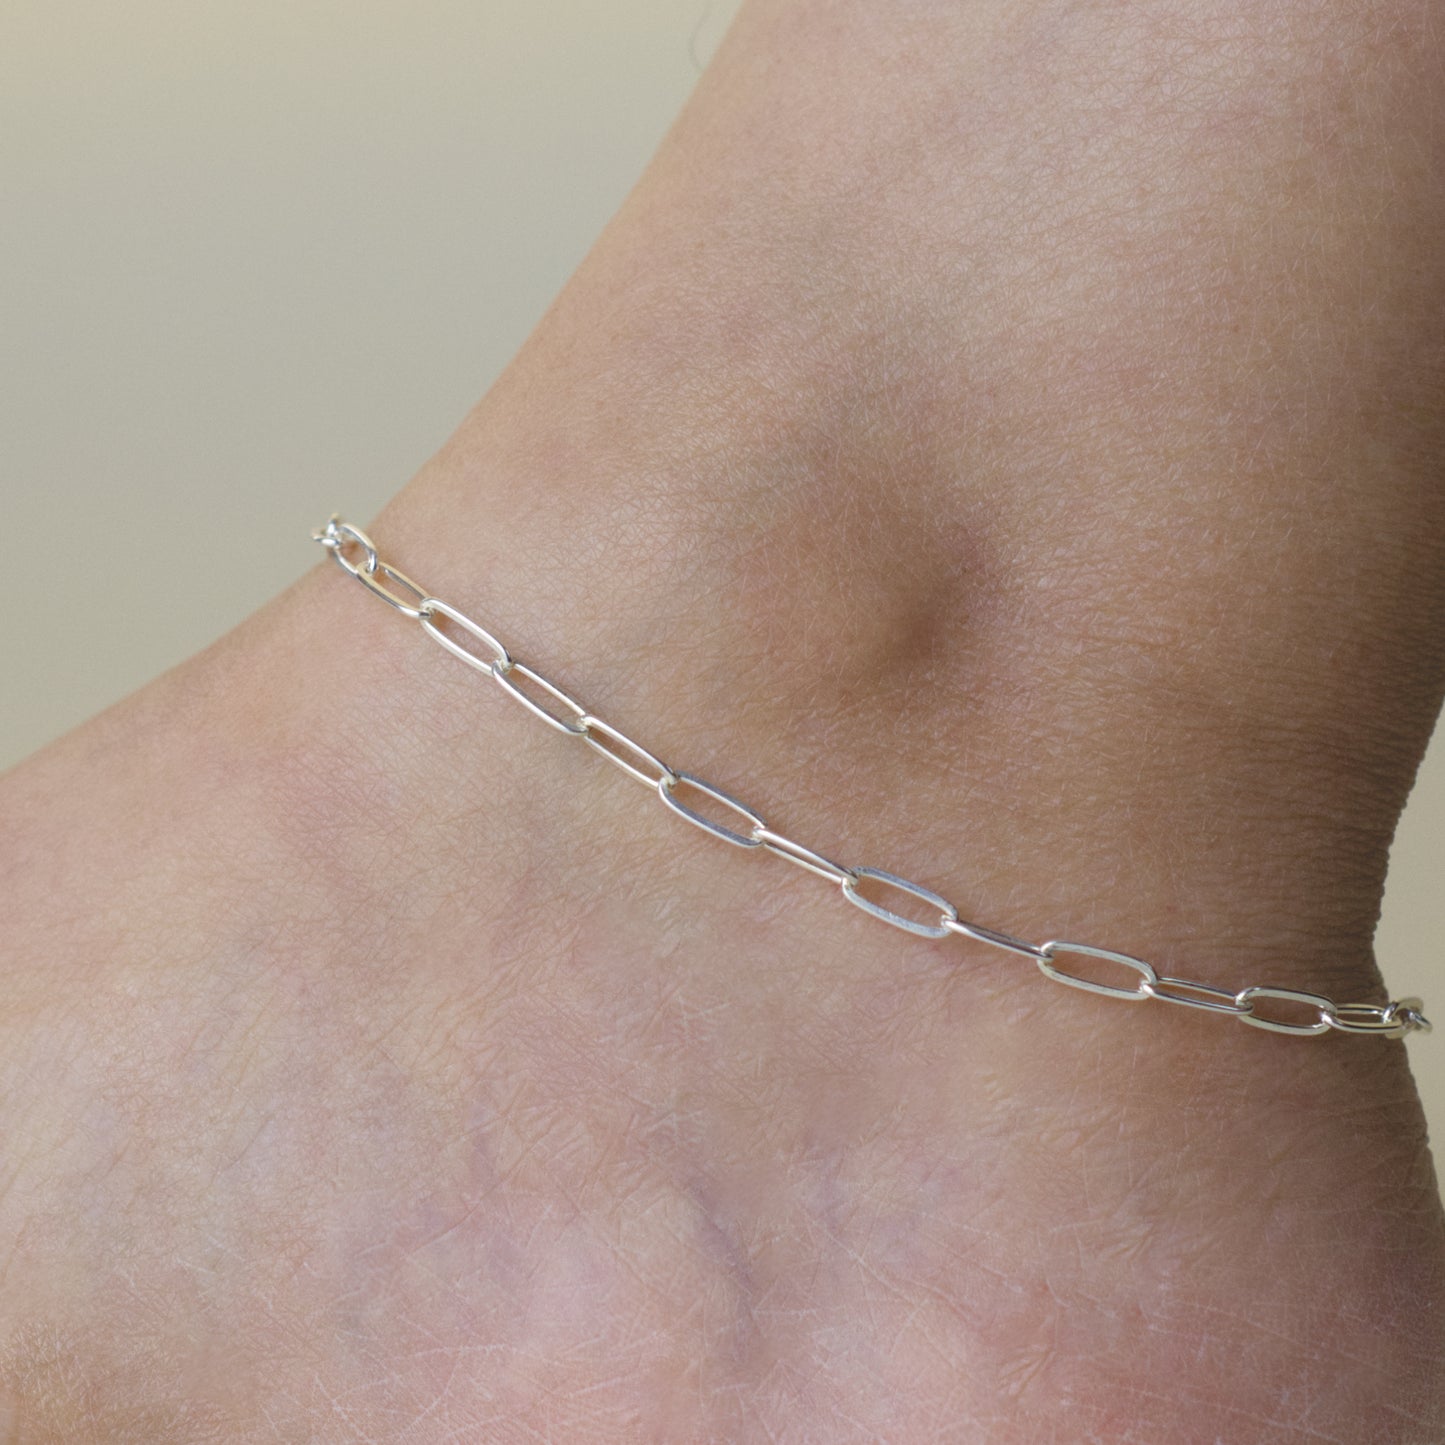 Woman wearing a 925 sterling silver paperclip chain anklet with a classic style (large) link size